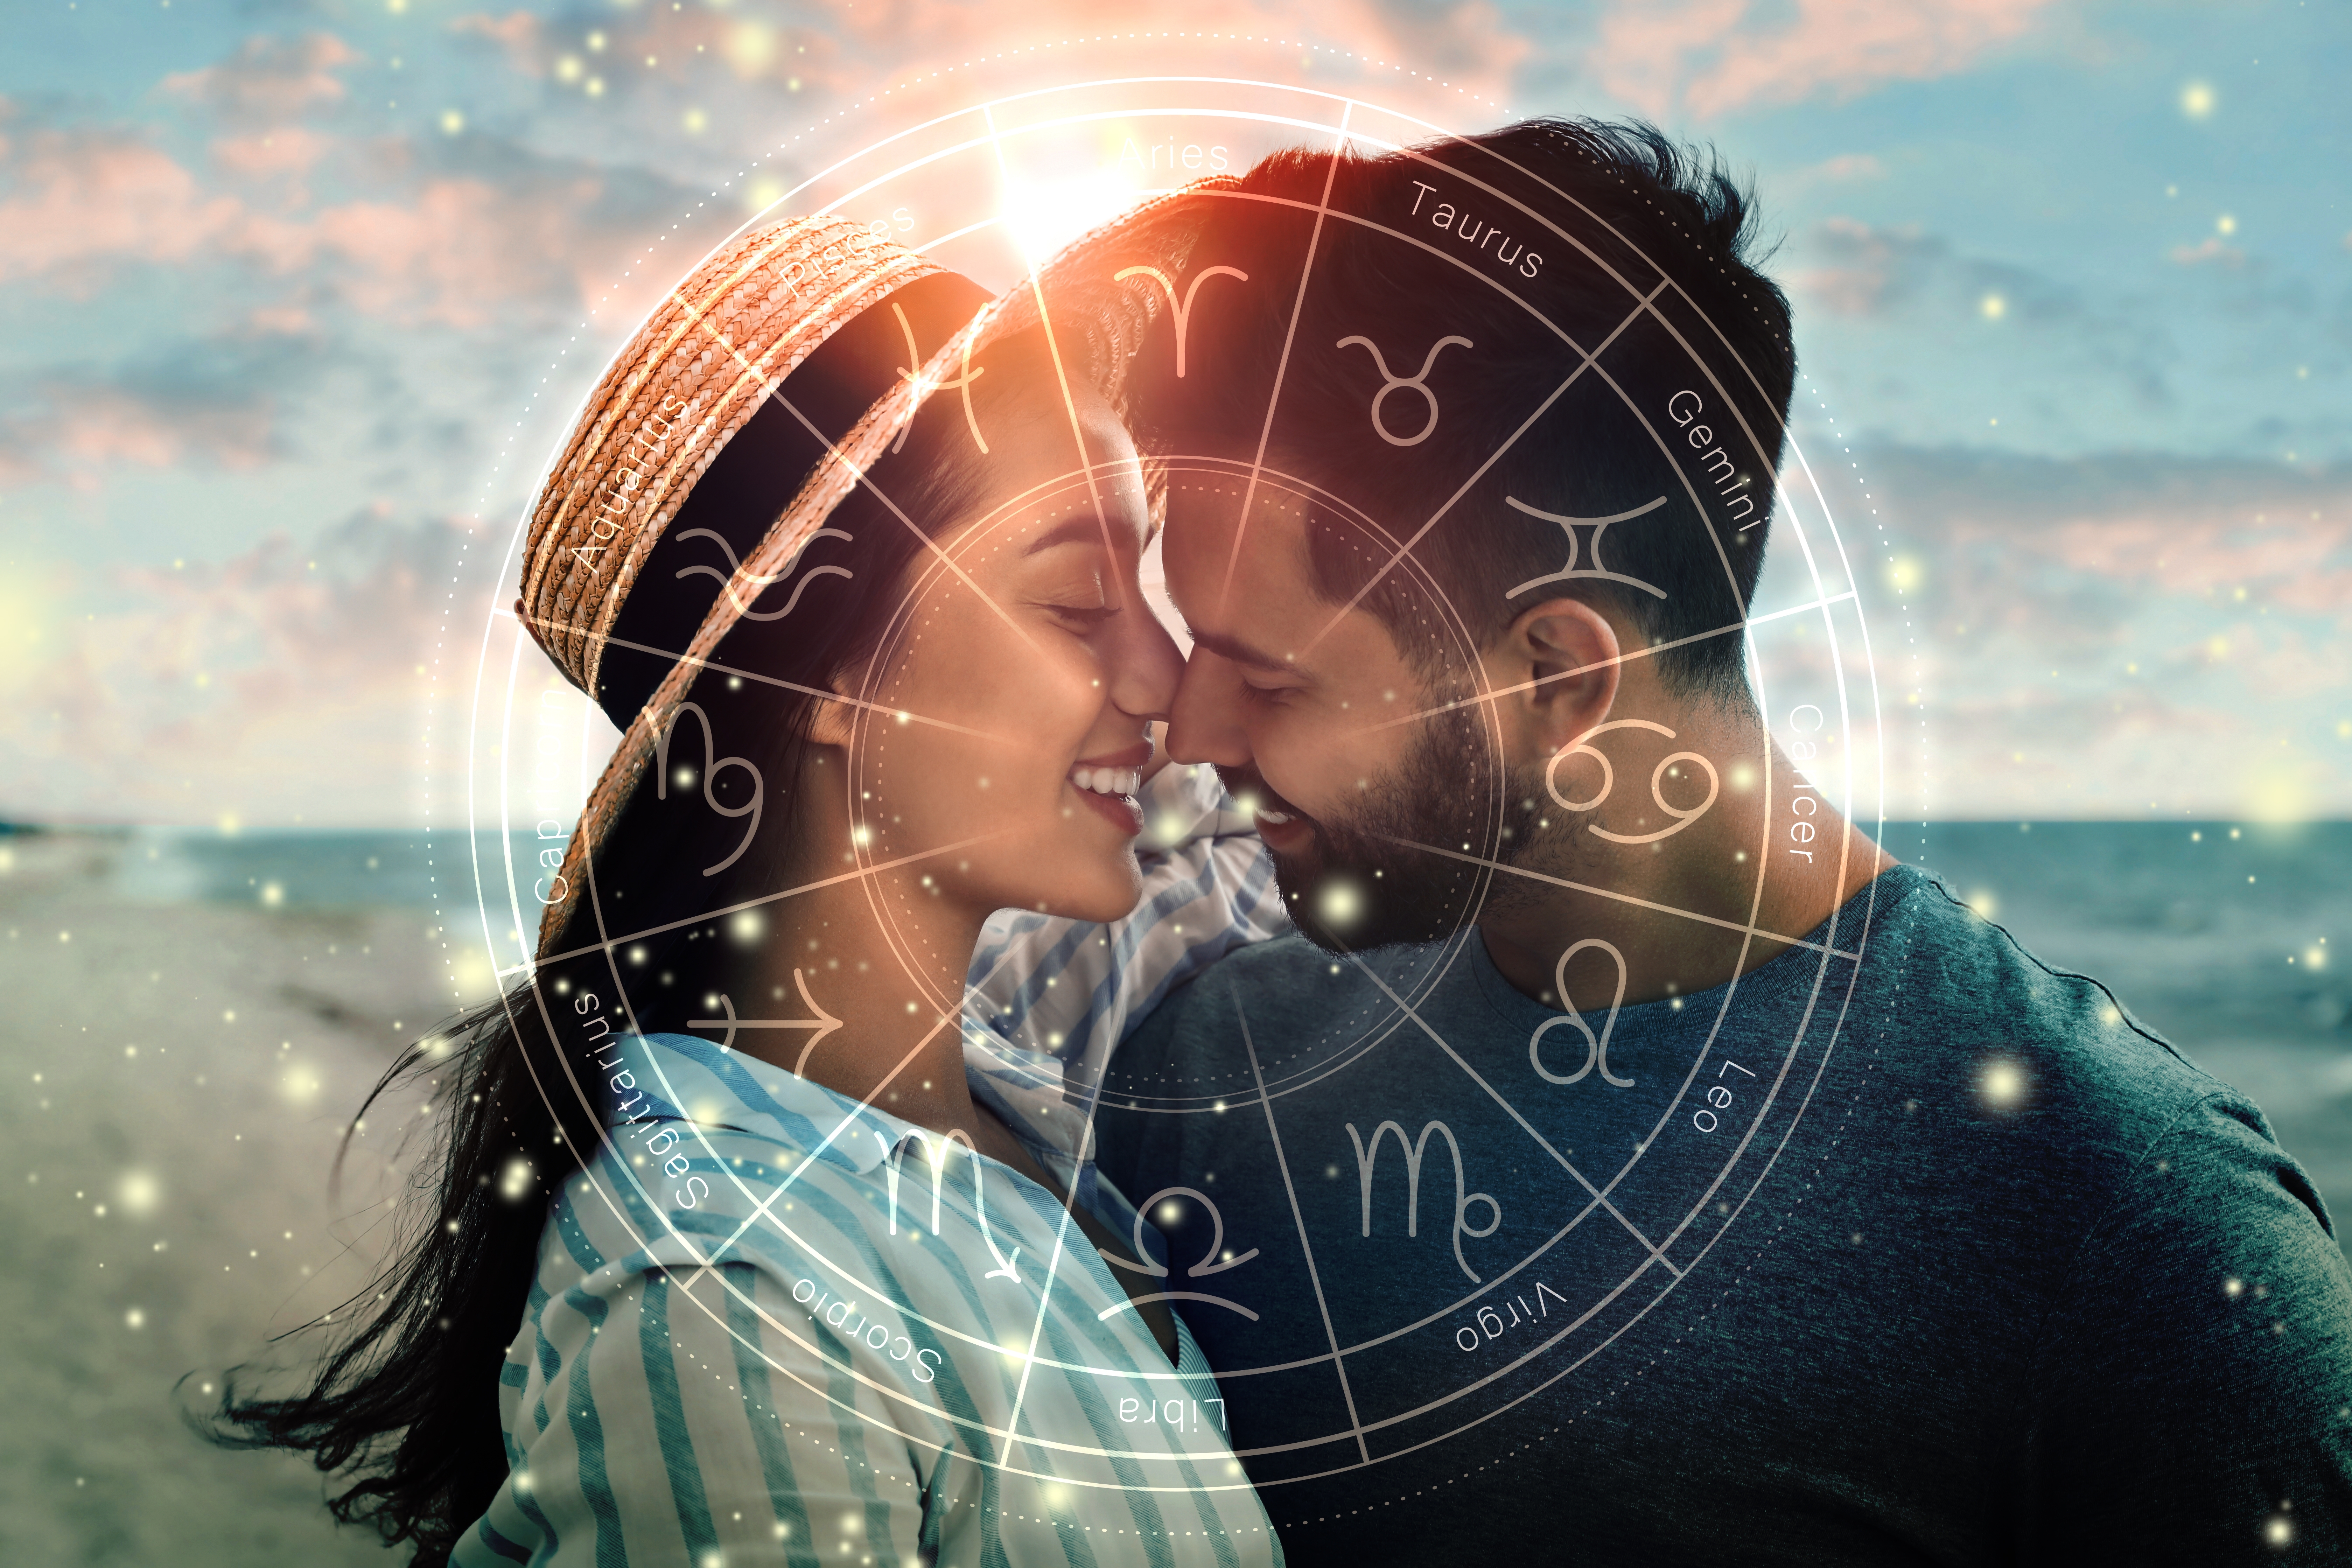 An image of a man and woman about to kiss with an astrology chart